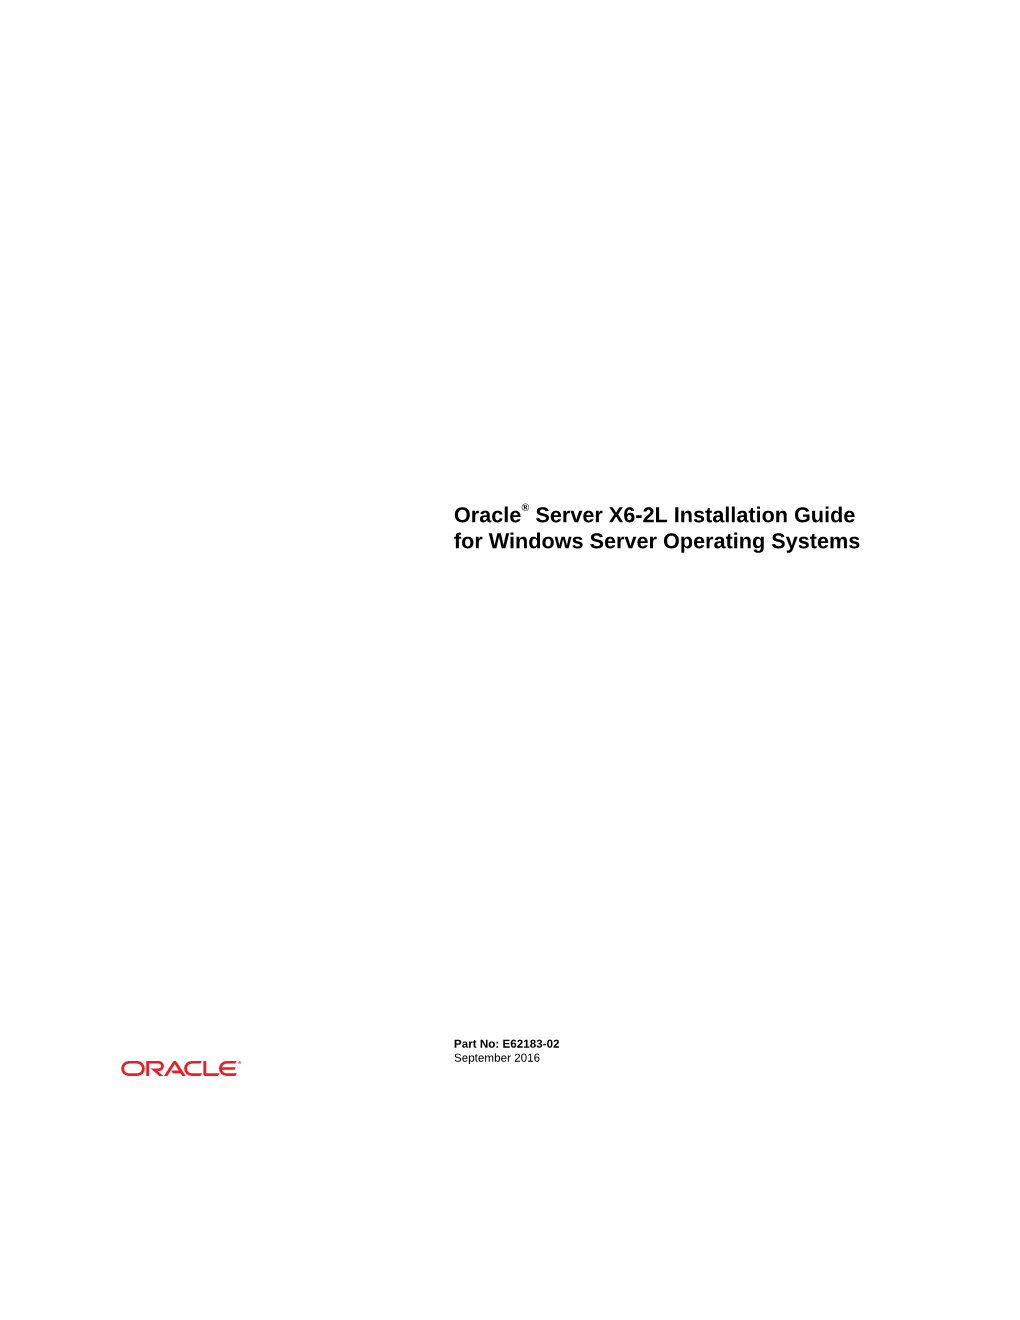 Oracle® Server X6-2L Installation Guide for Windows Server Operating Systems